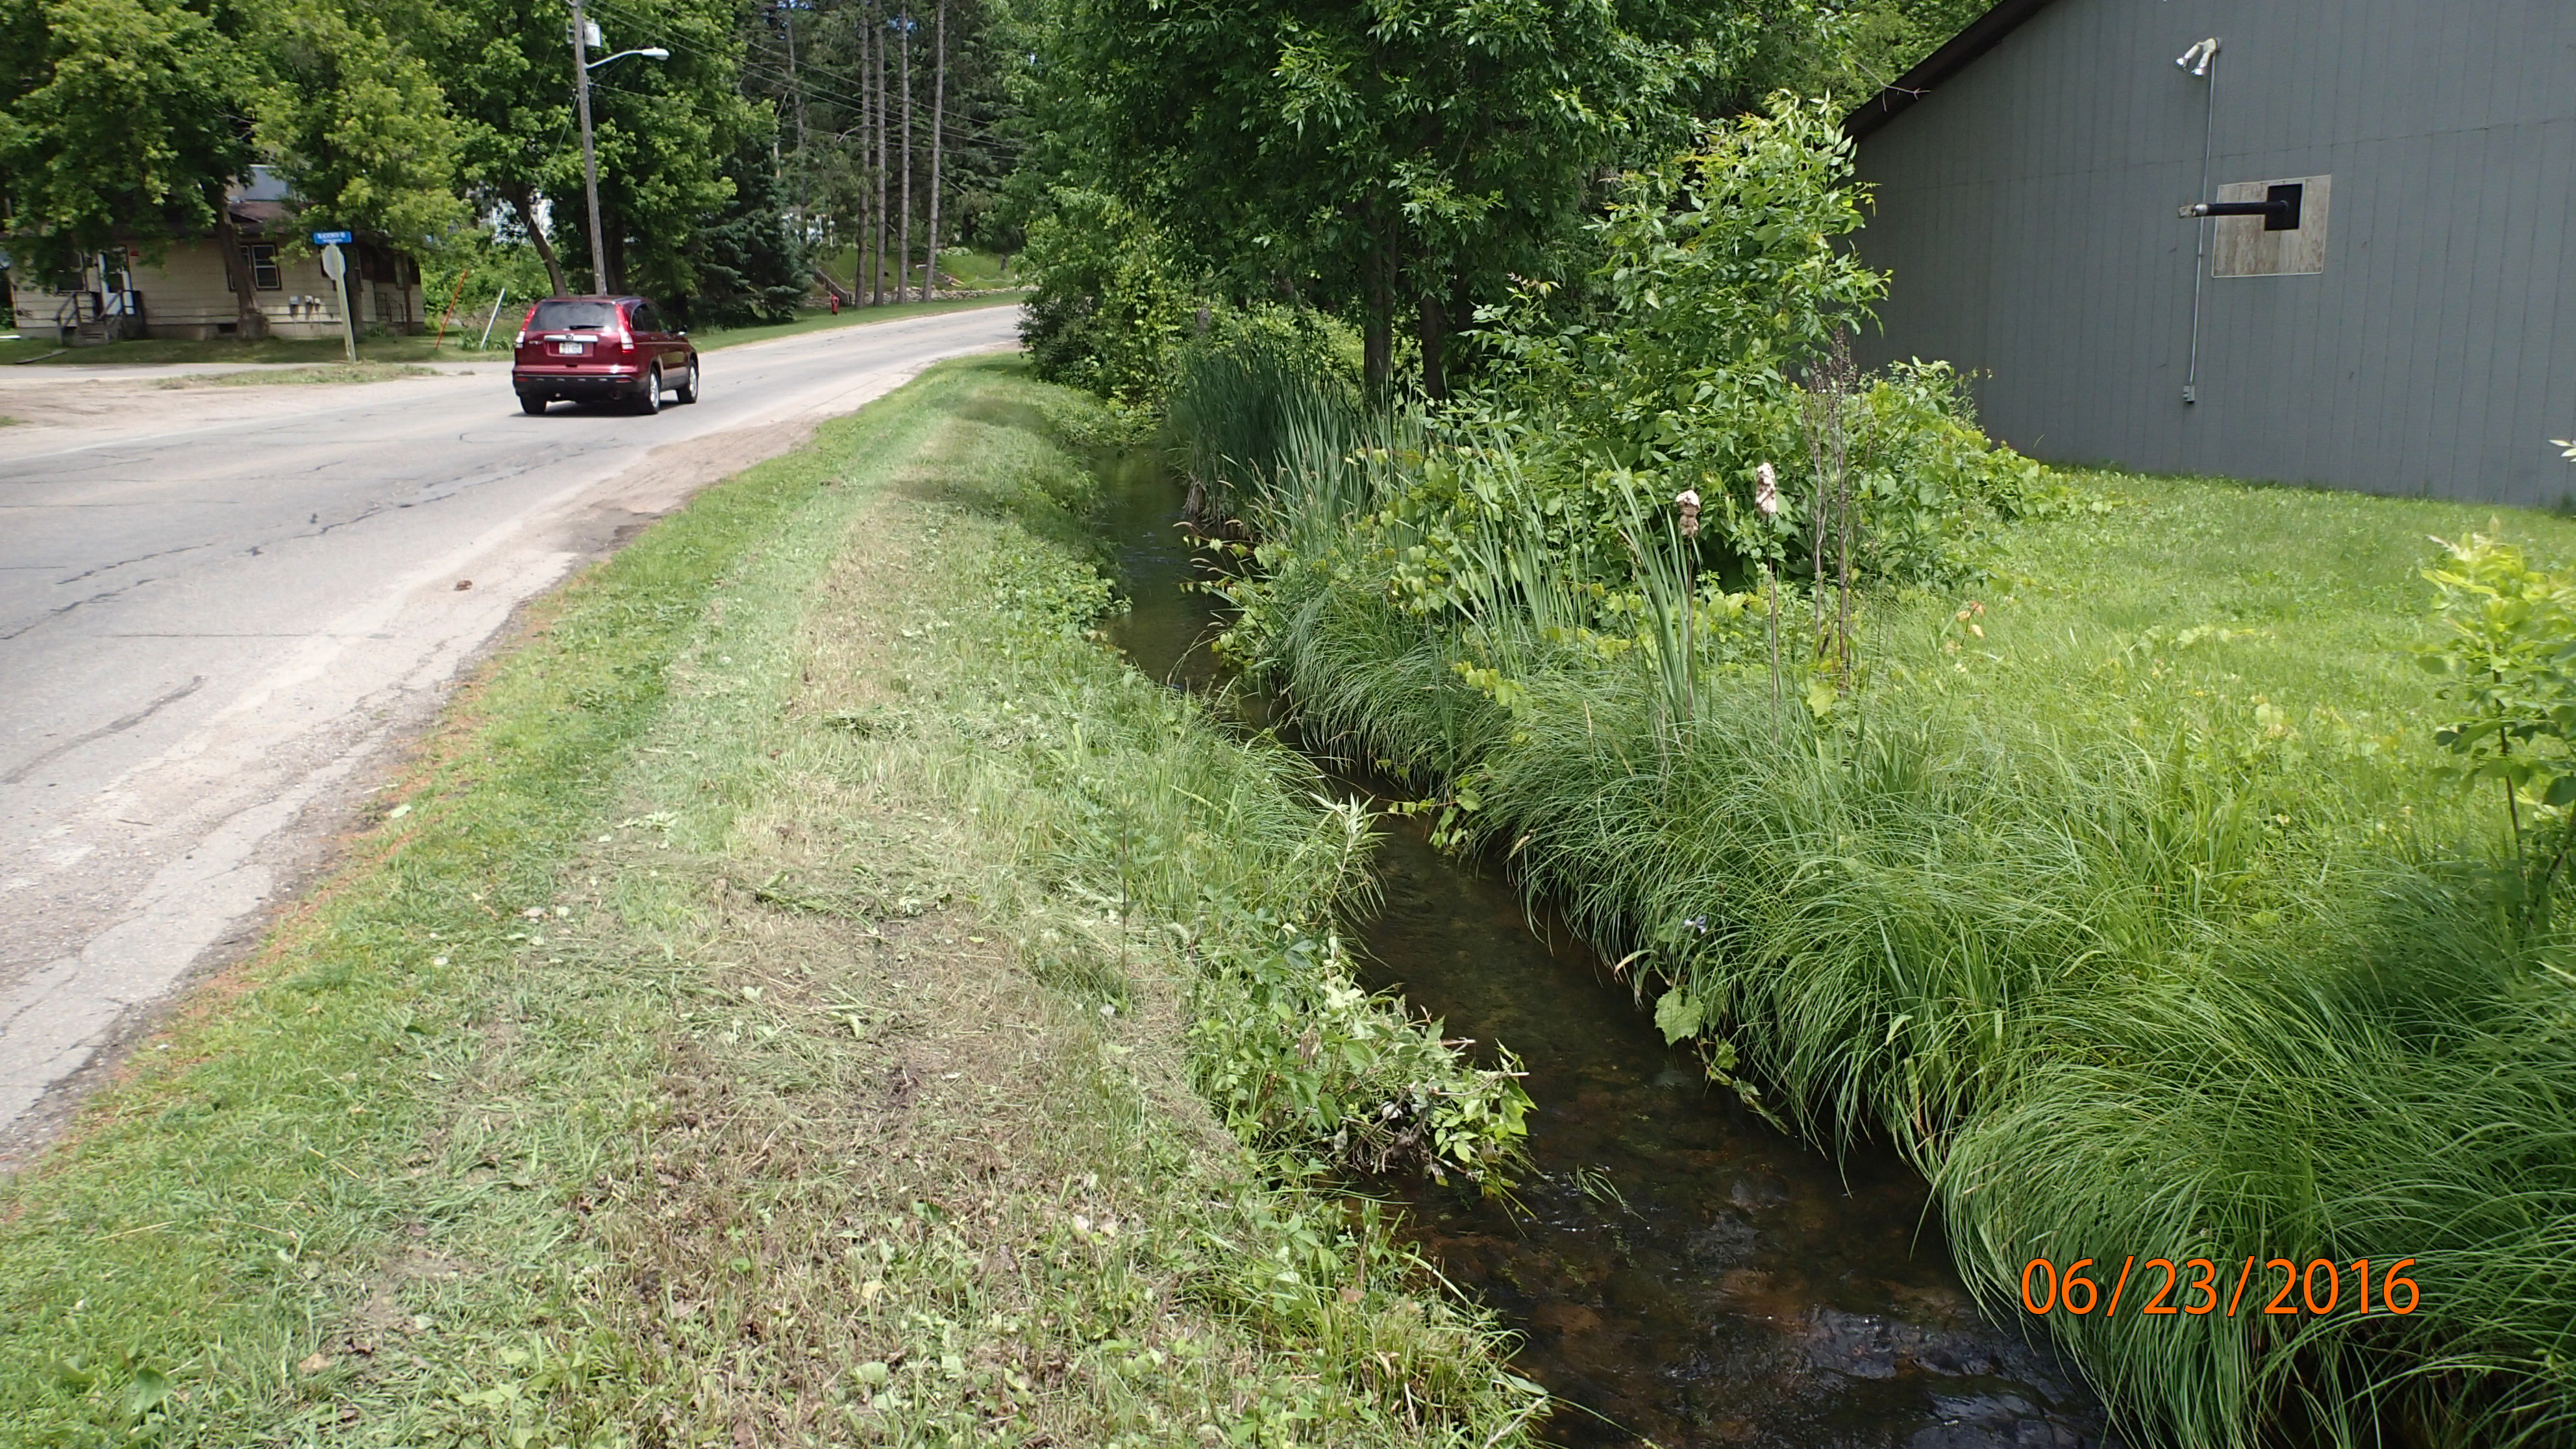 Keshena Creek, West Branch Wolf River Watershed (WR17)